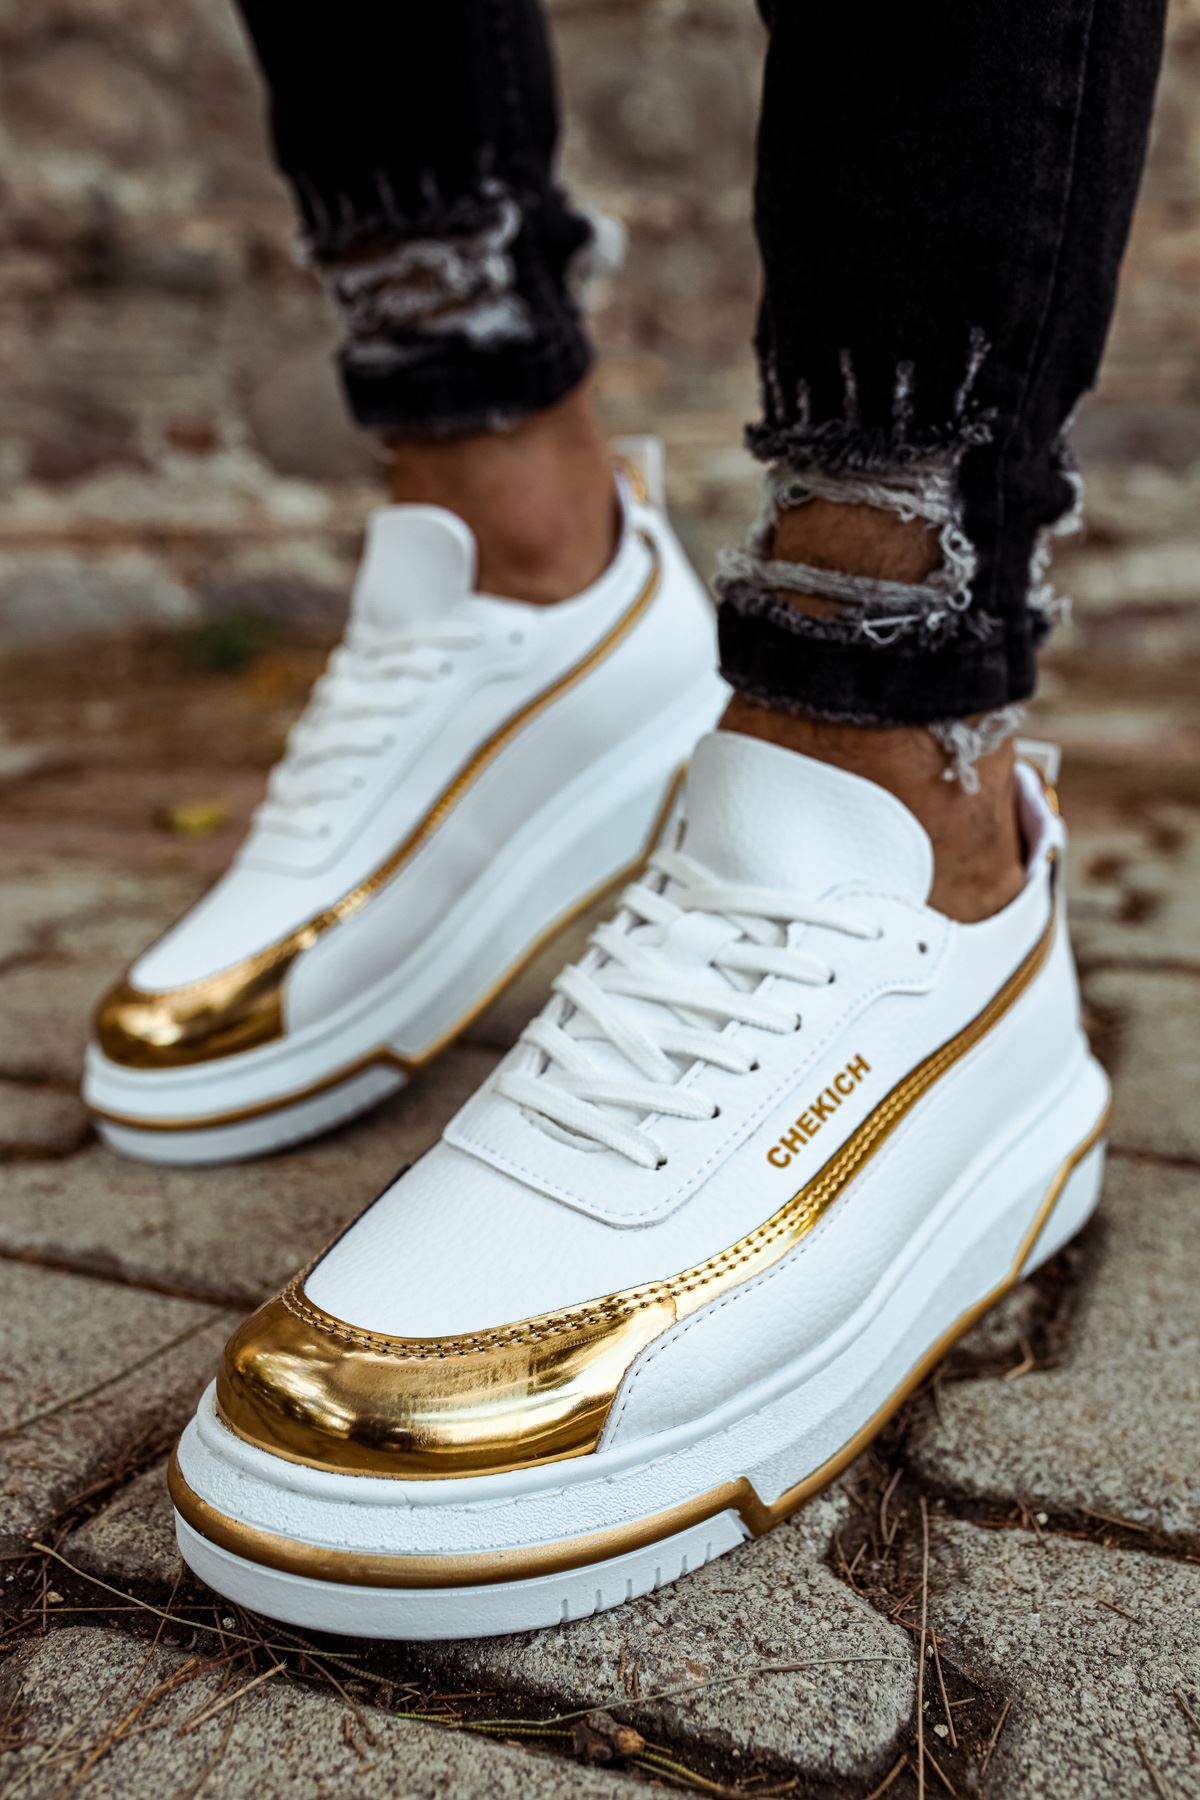 Chekich Men's & Women's Casual Shoes White - Yellow Color Artificial Leather Lace Up Casual Shoes Spring and Autumn Seasons Luxury Gold Lovers Orthopedic Sneakers Breathable Lightweight Sport Wedding Formal Suits CH041